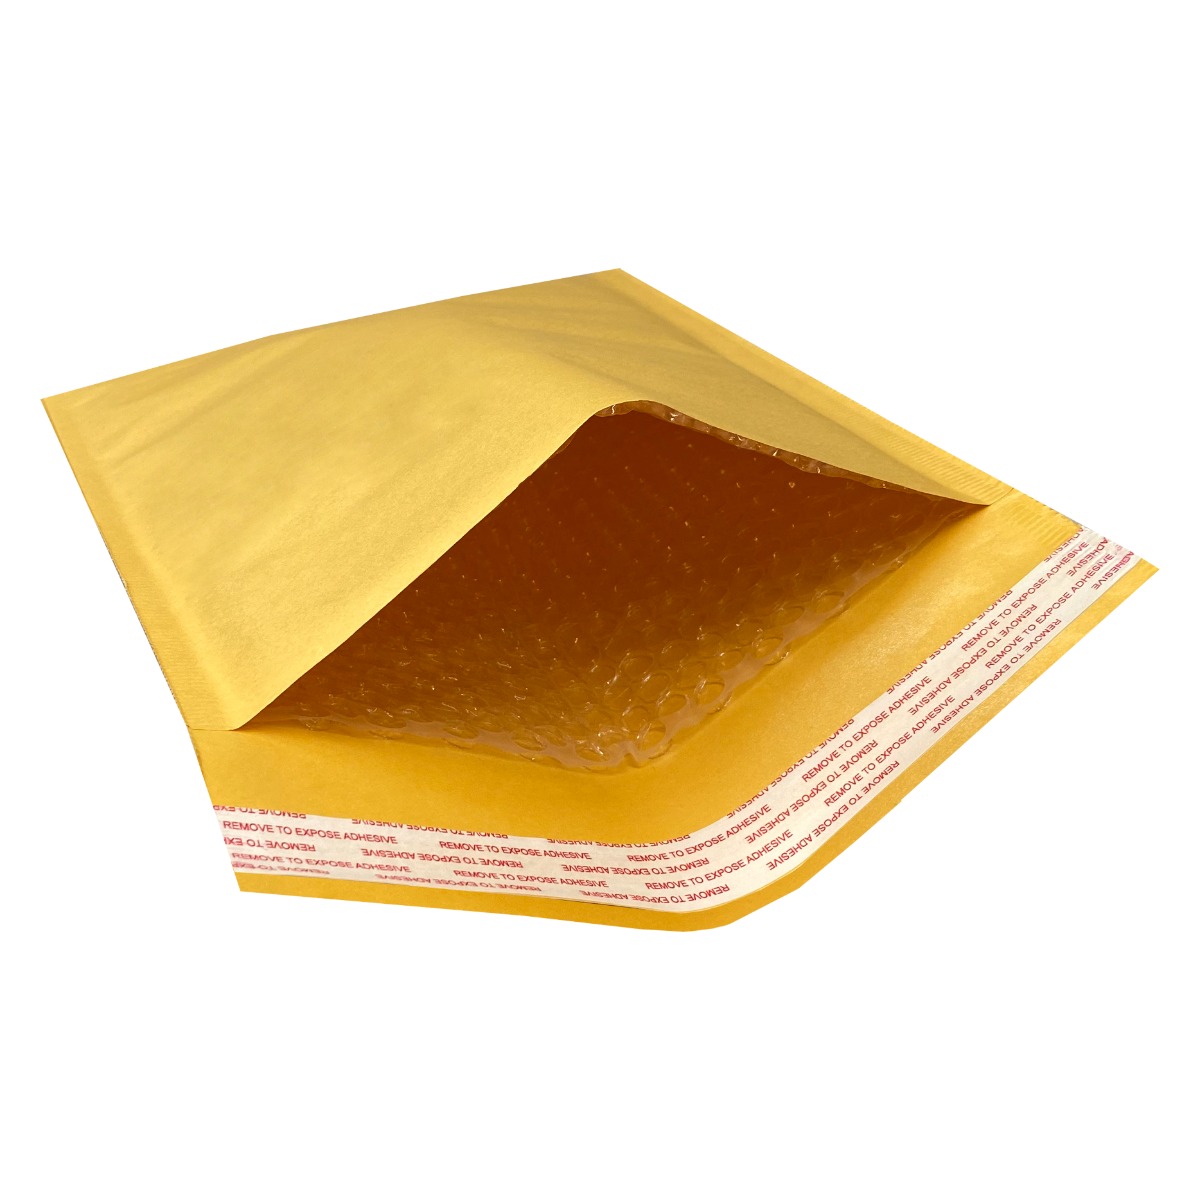 400 #2-8.5" x 12" BUBBLE MAILERS PADDED ENVELOPES 